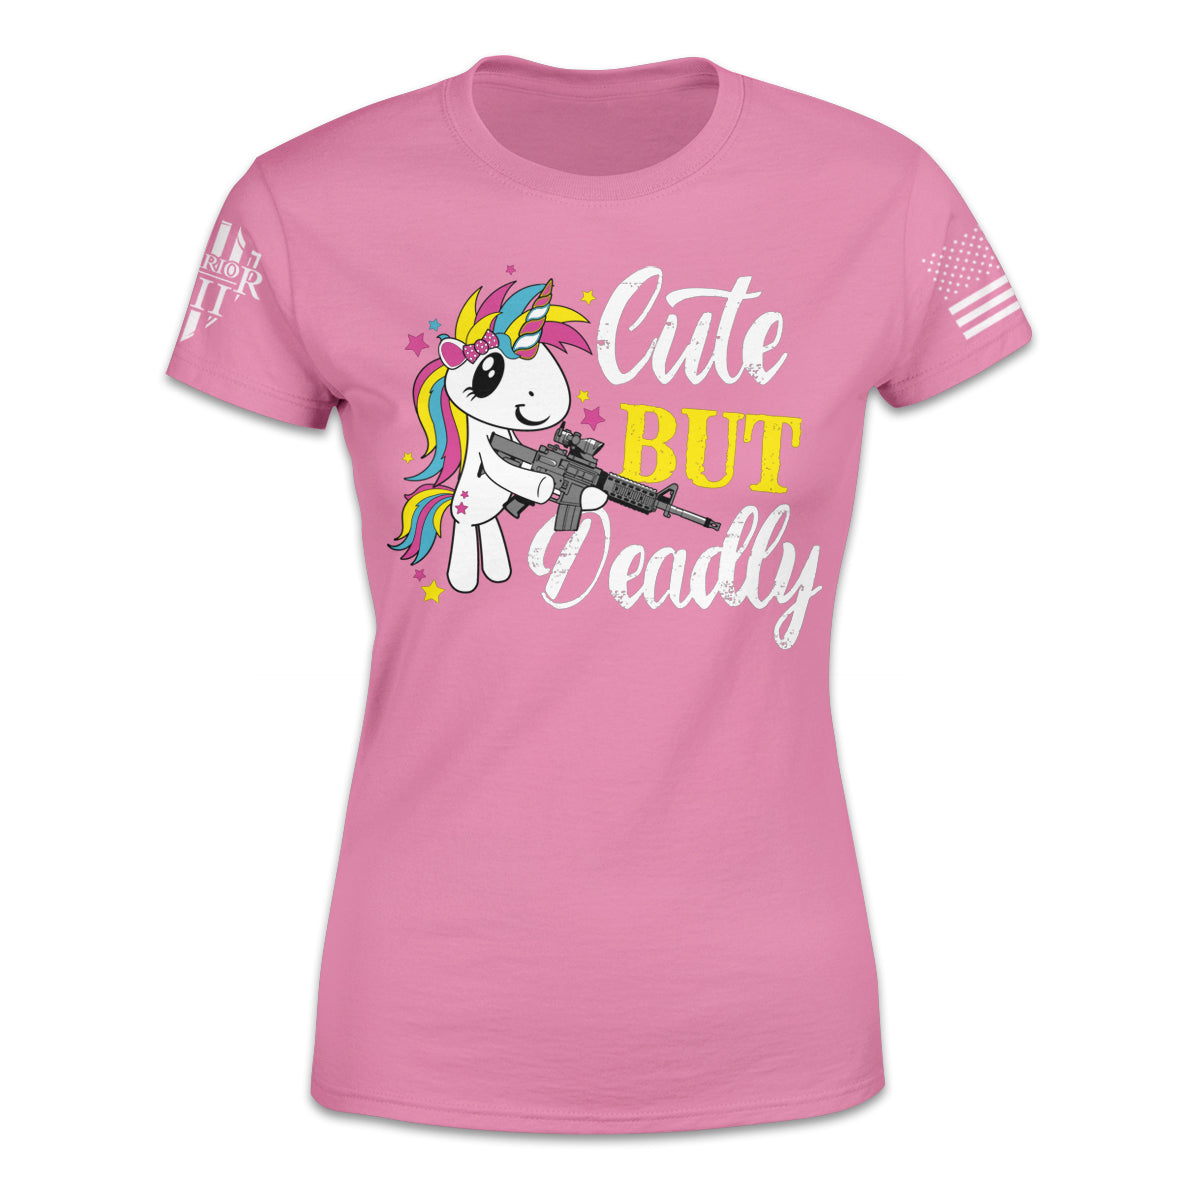 Women's pink t-shirt with the words "cute but deadly" and a unicorn holding a gun printed on the front of the shirt.